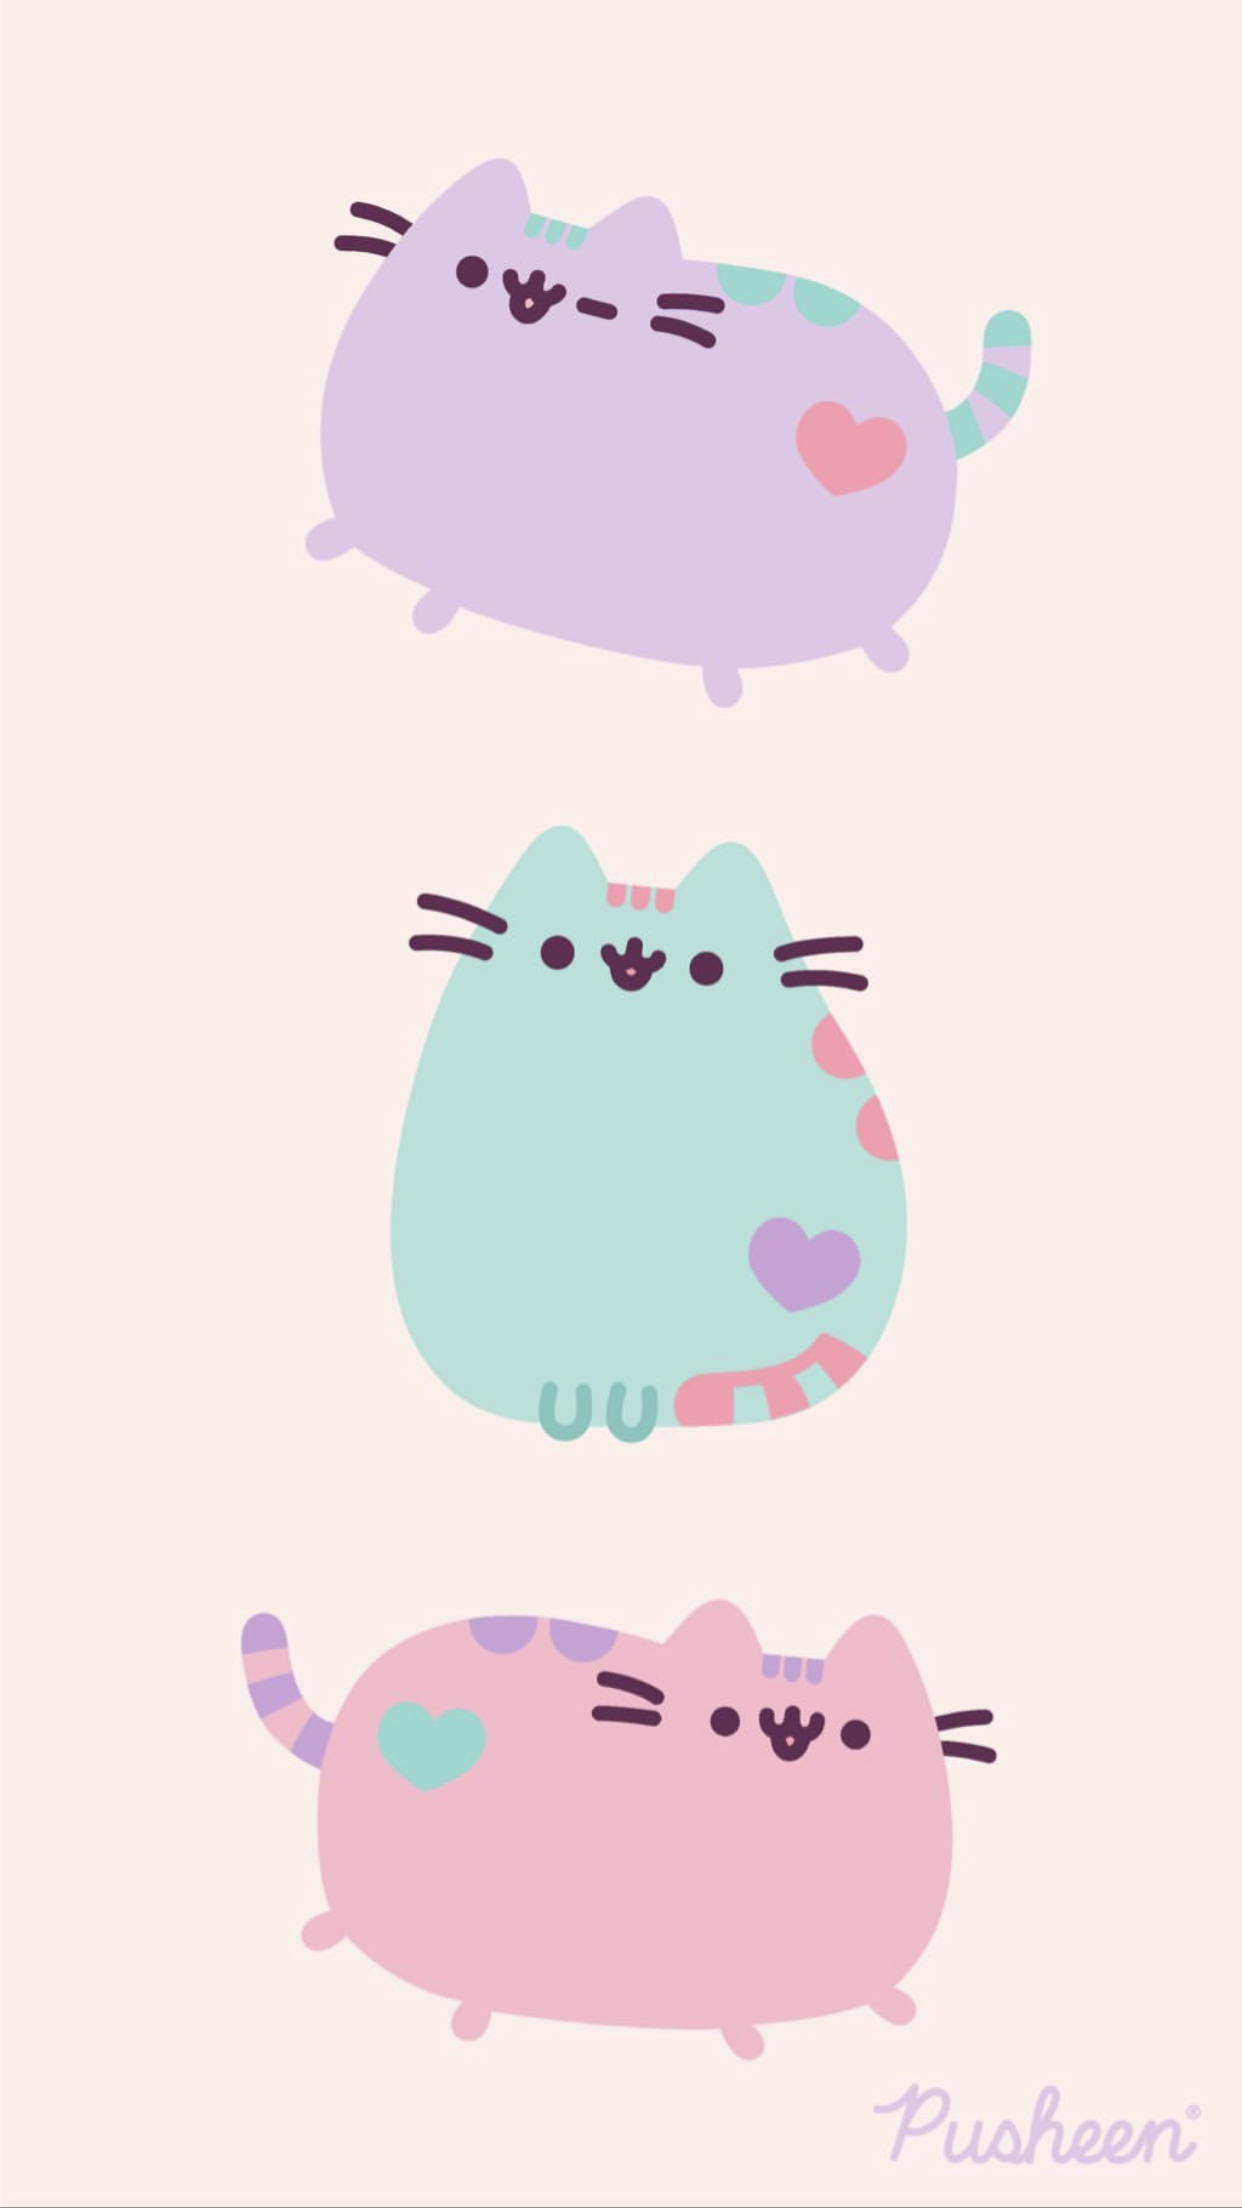 Pusheen The Cat Floral Pastels Spring iPhone Wallpaper